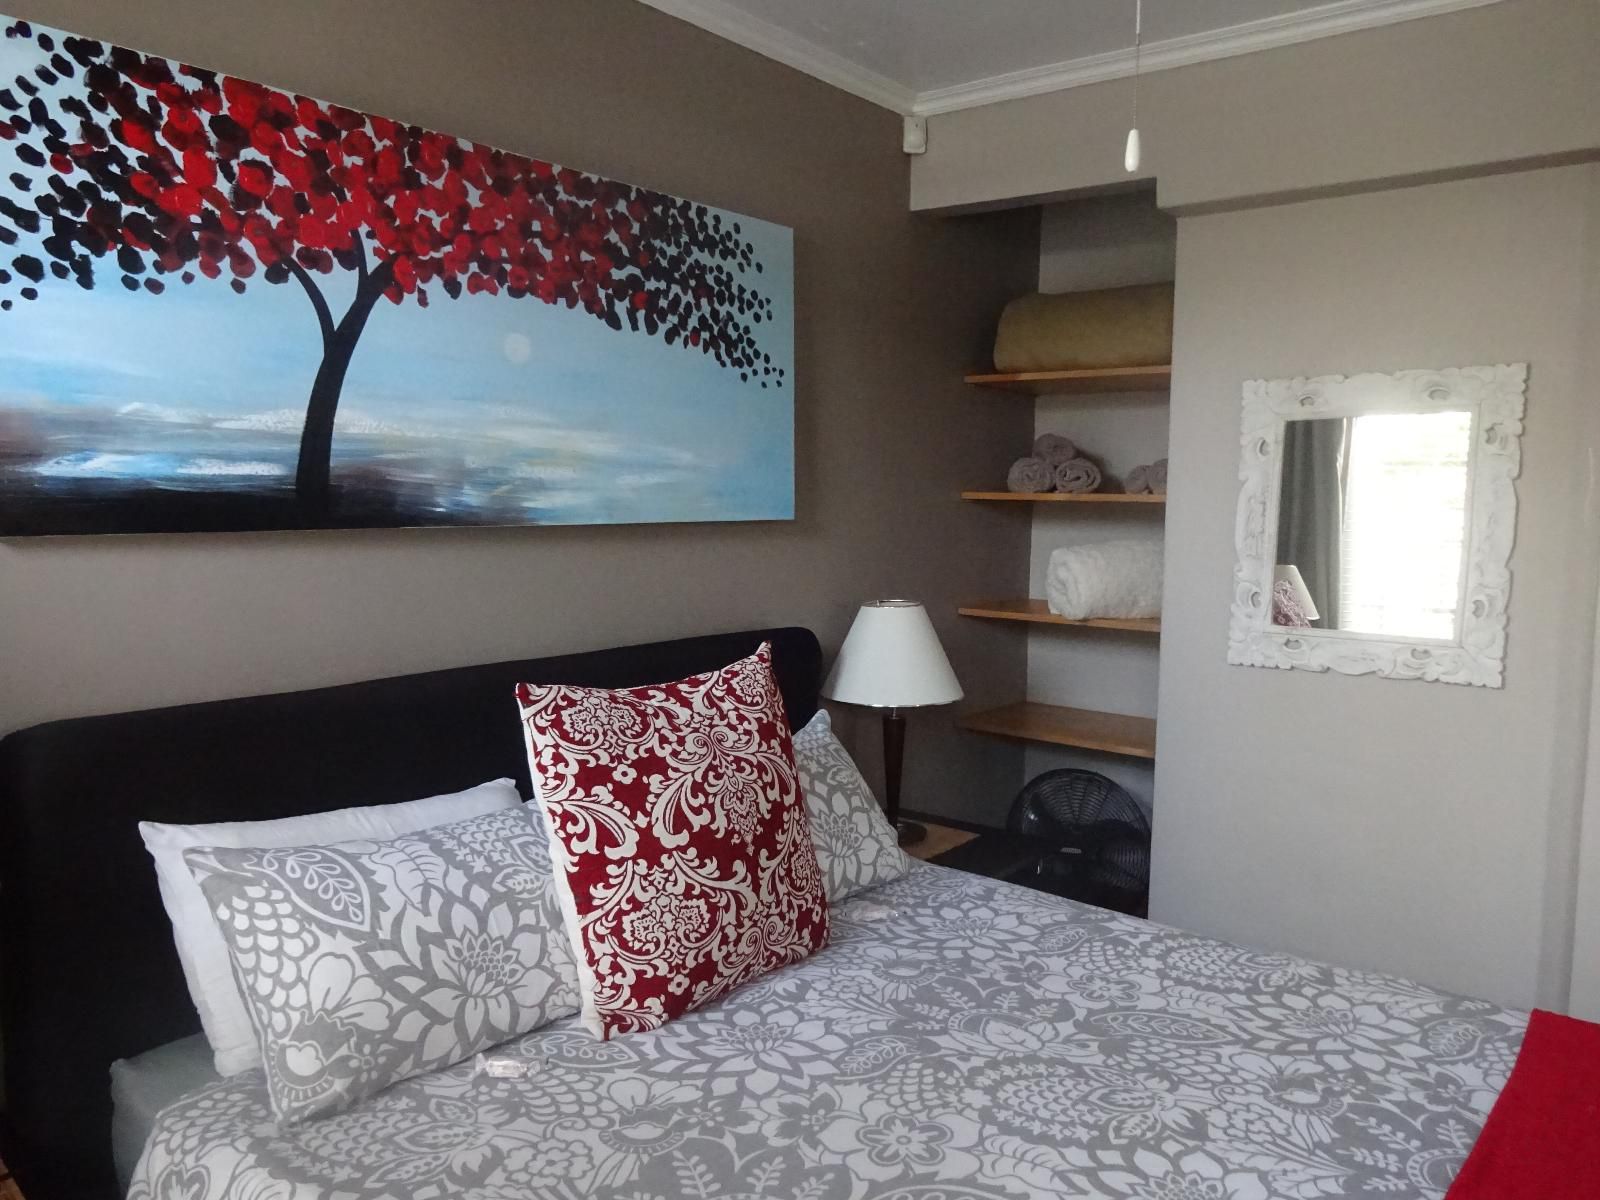 Hillview Self Catering Knysna Central Knysna Western Cape South Africa Window, Architecture, Bedroom